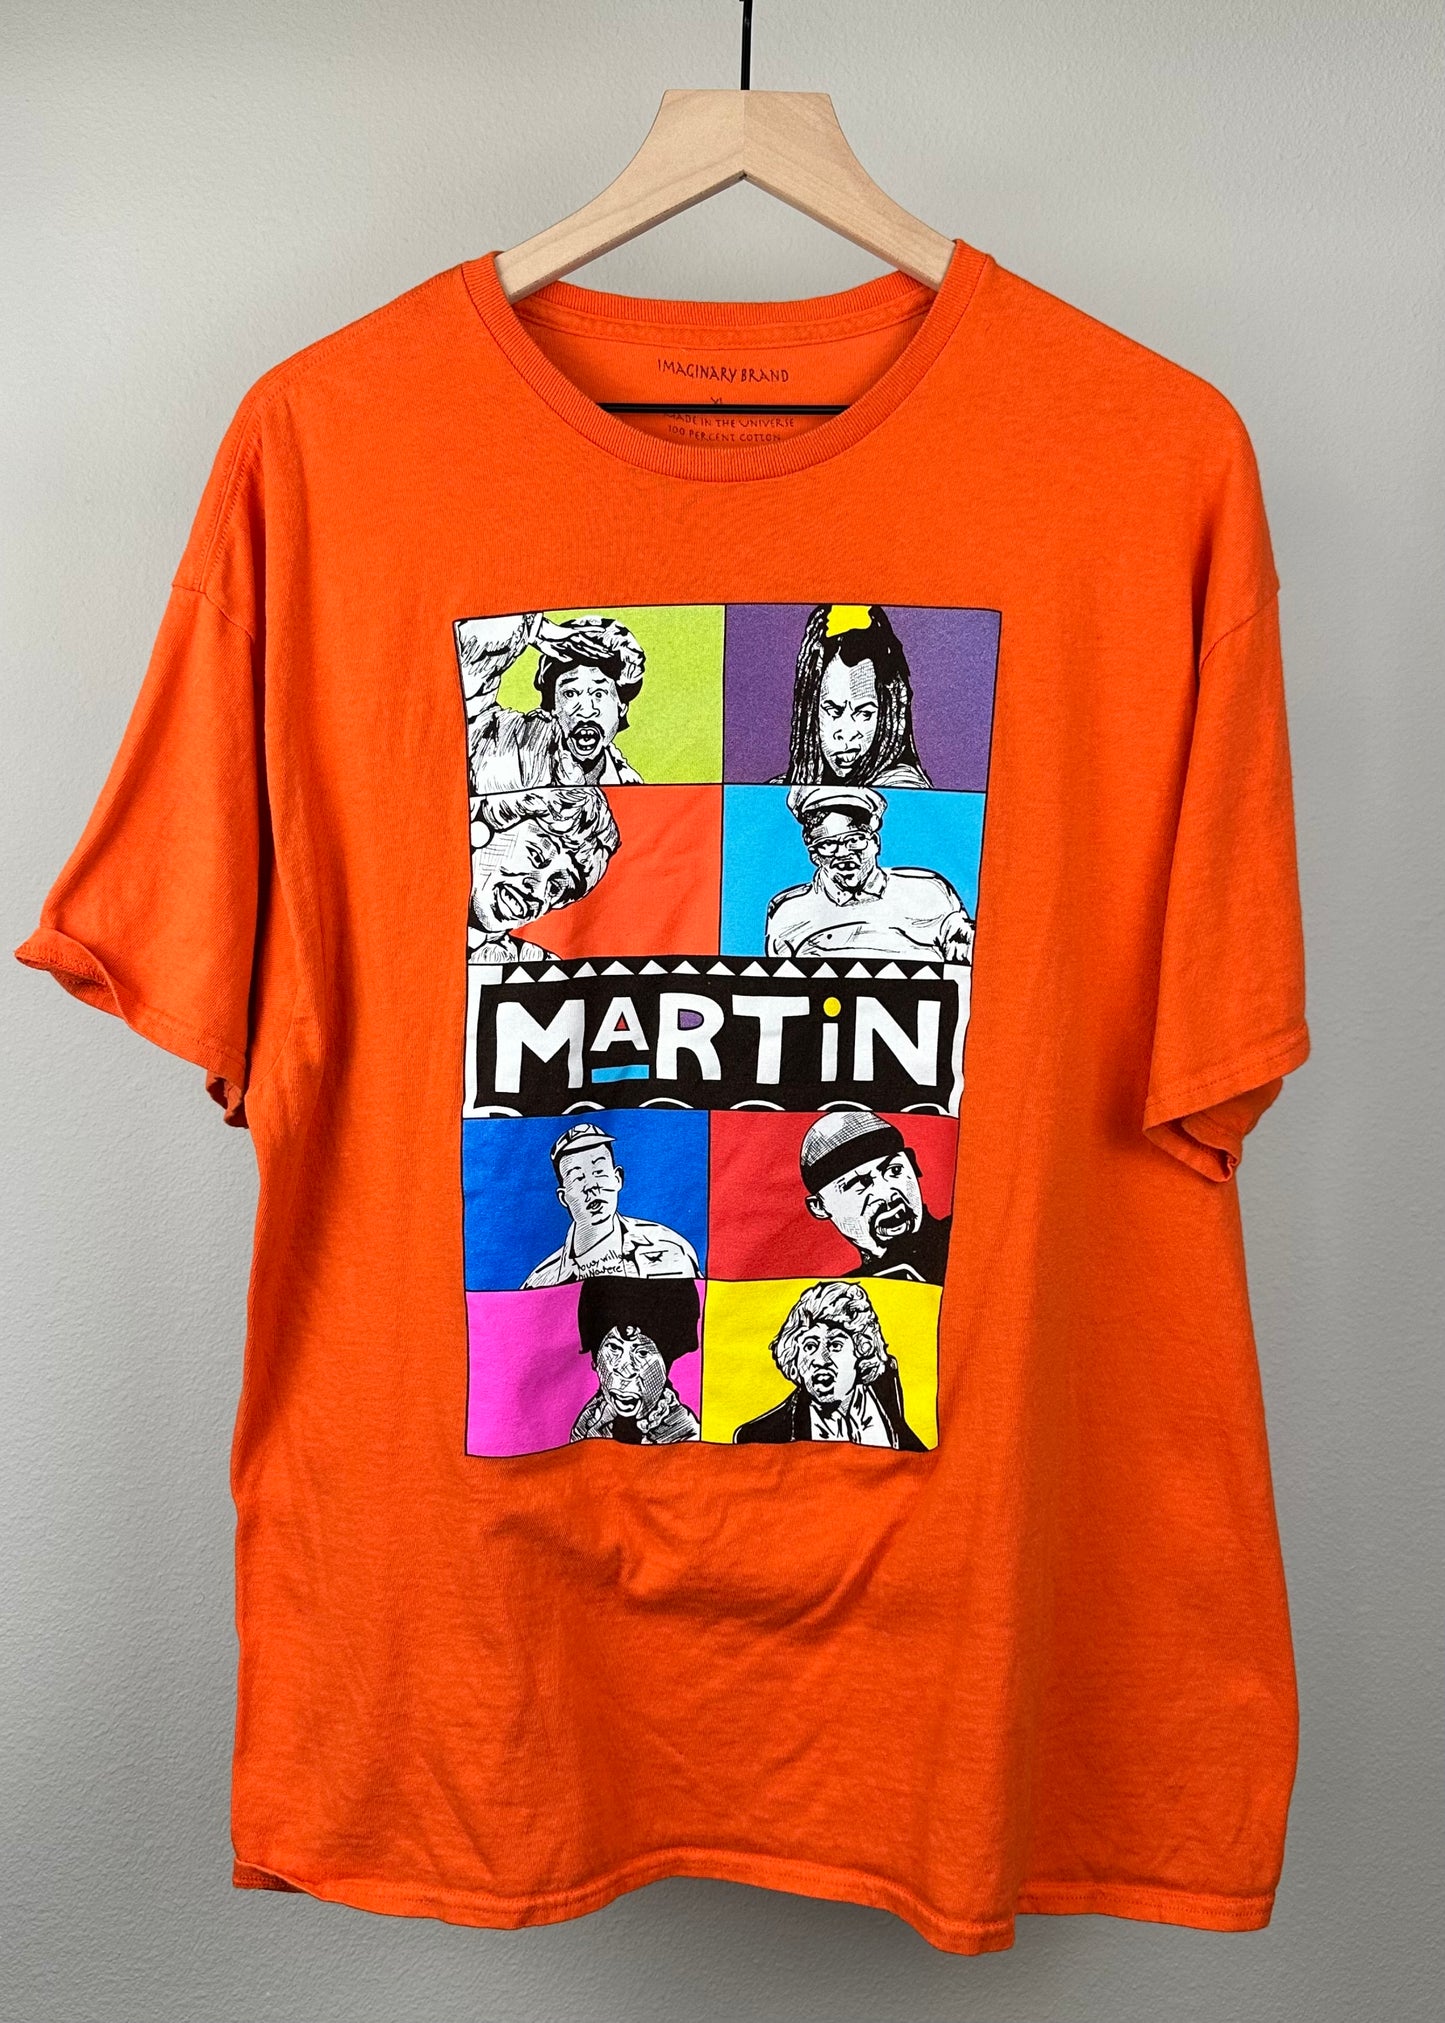 Martin Show Graphic T-Shirt By Imaginary Brand